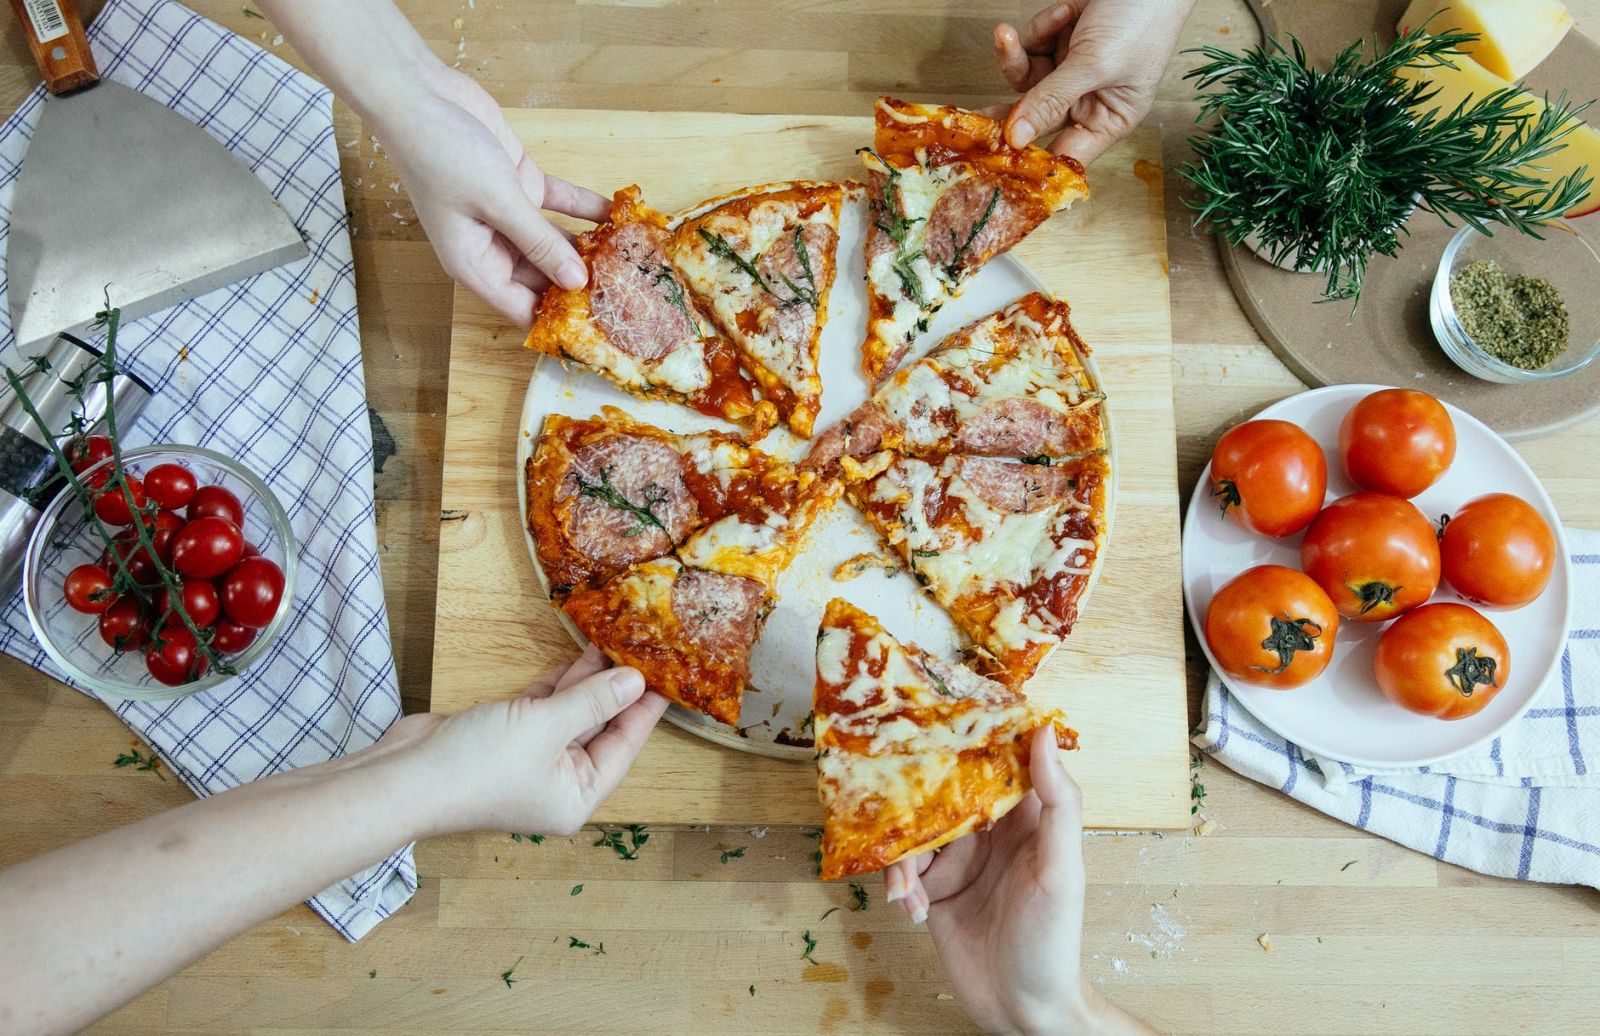 Eating pizza together with friends (Photo by Katerina Holmes from Pexels)